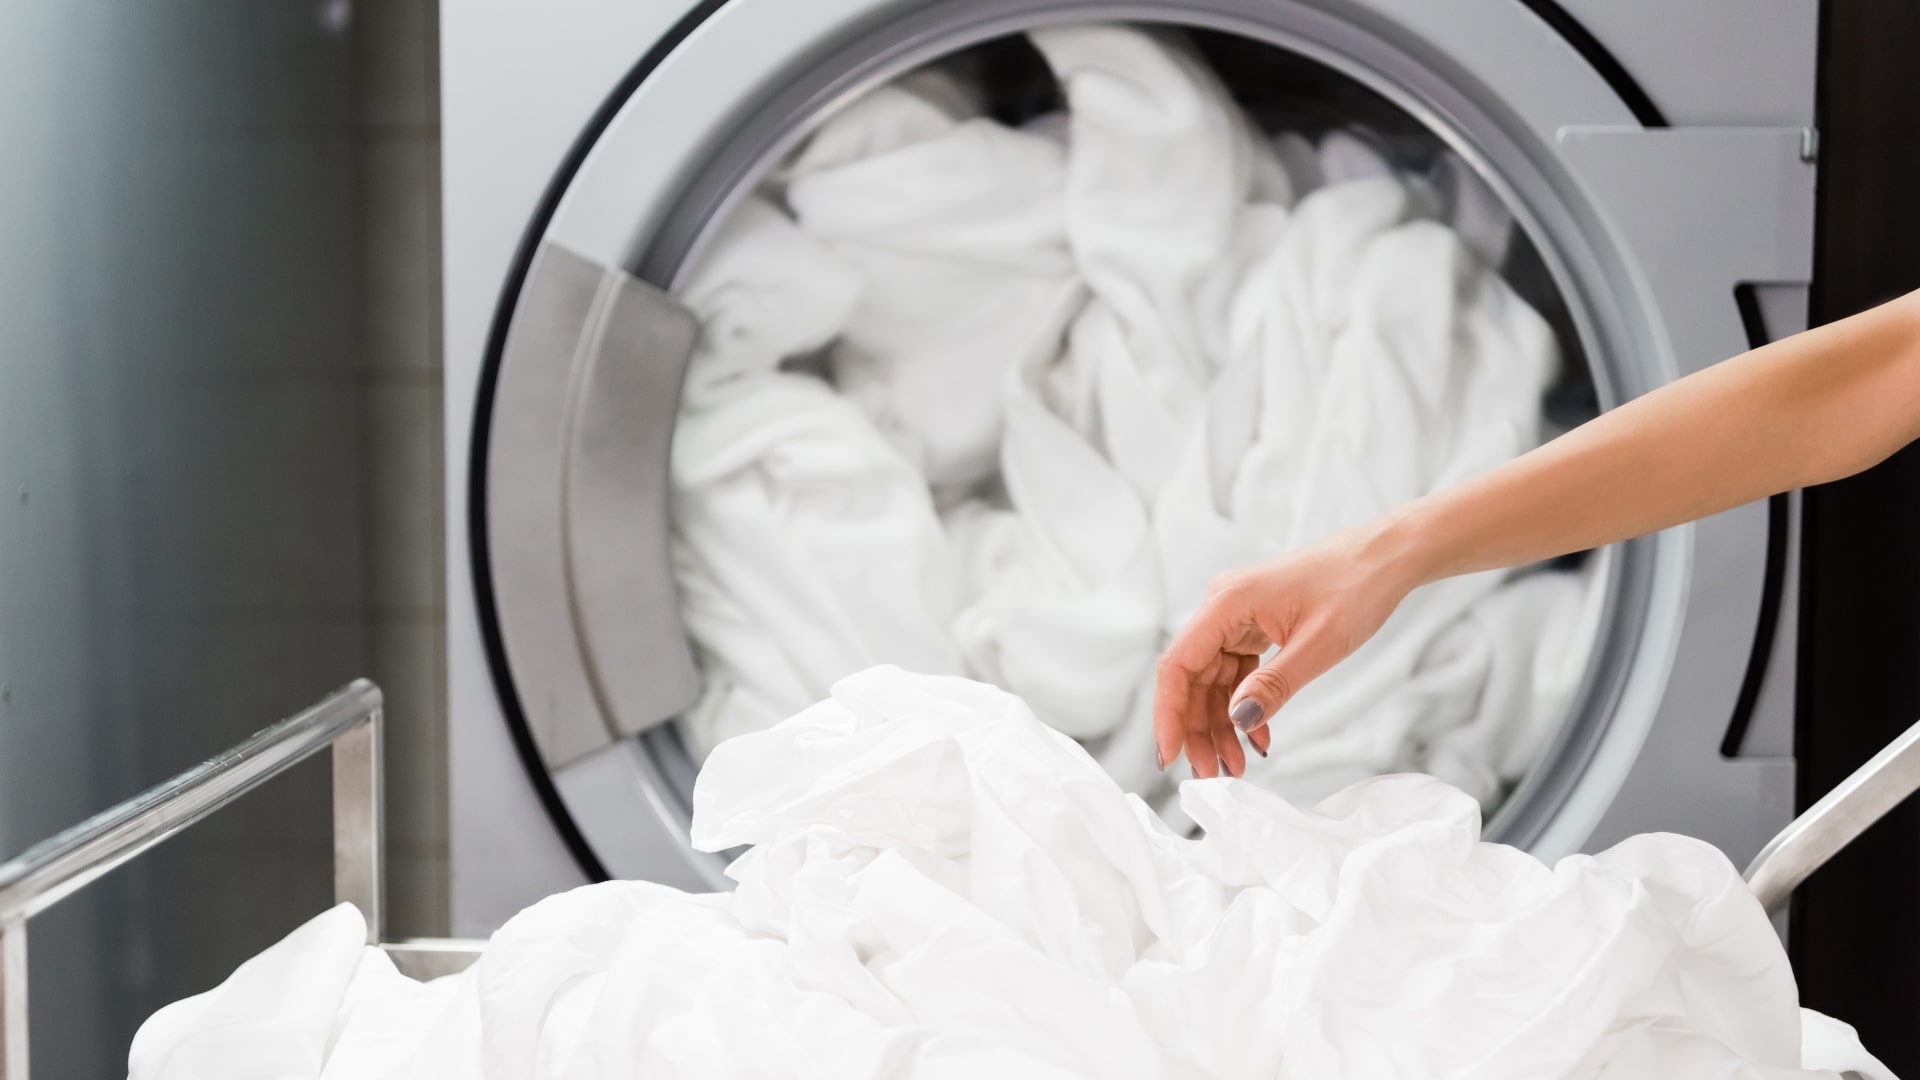 Featured image for “How to Dry Bedsheets in the Dryer”